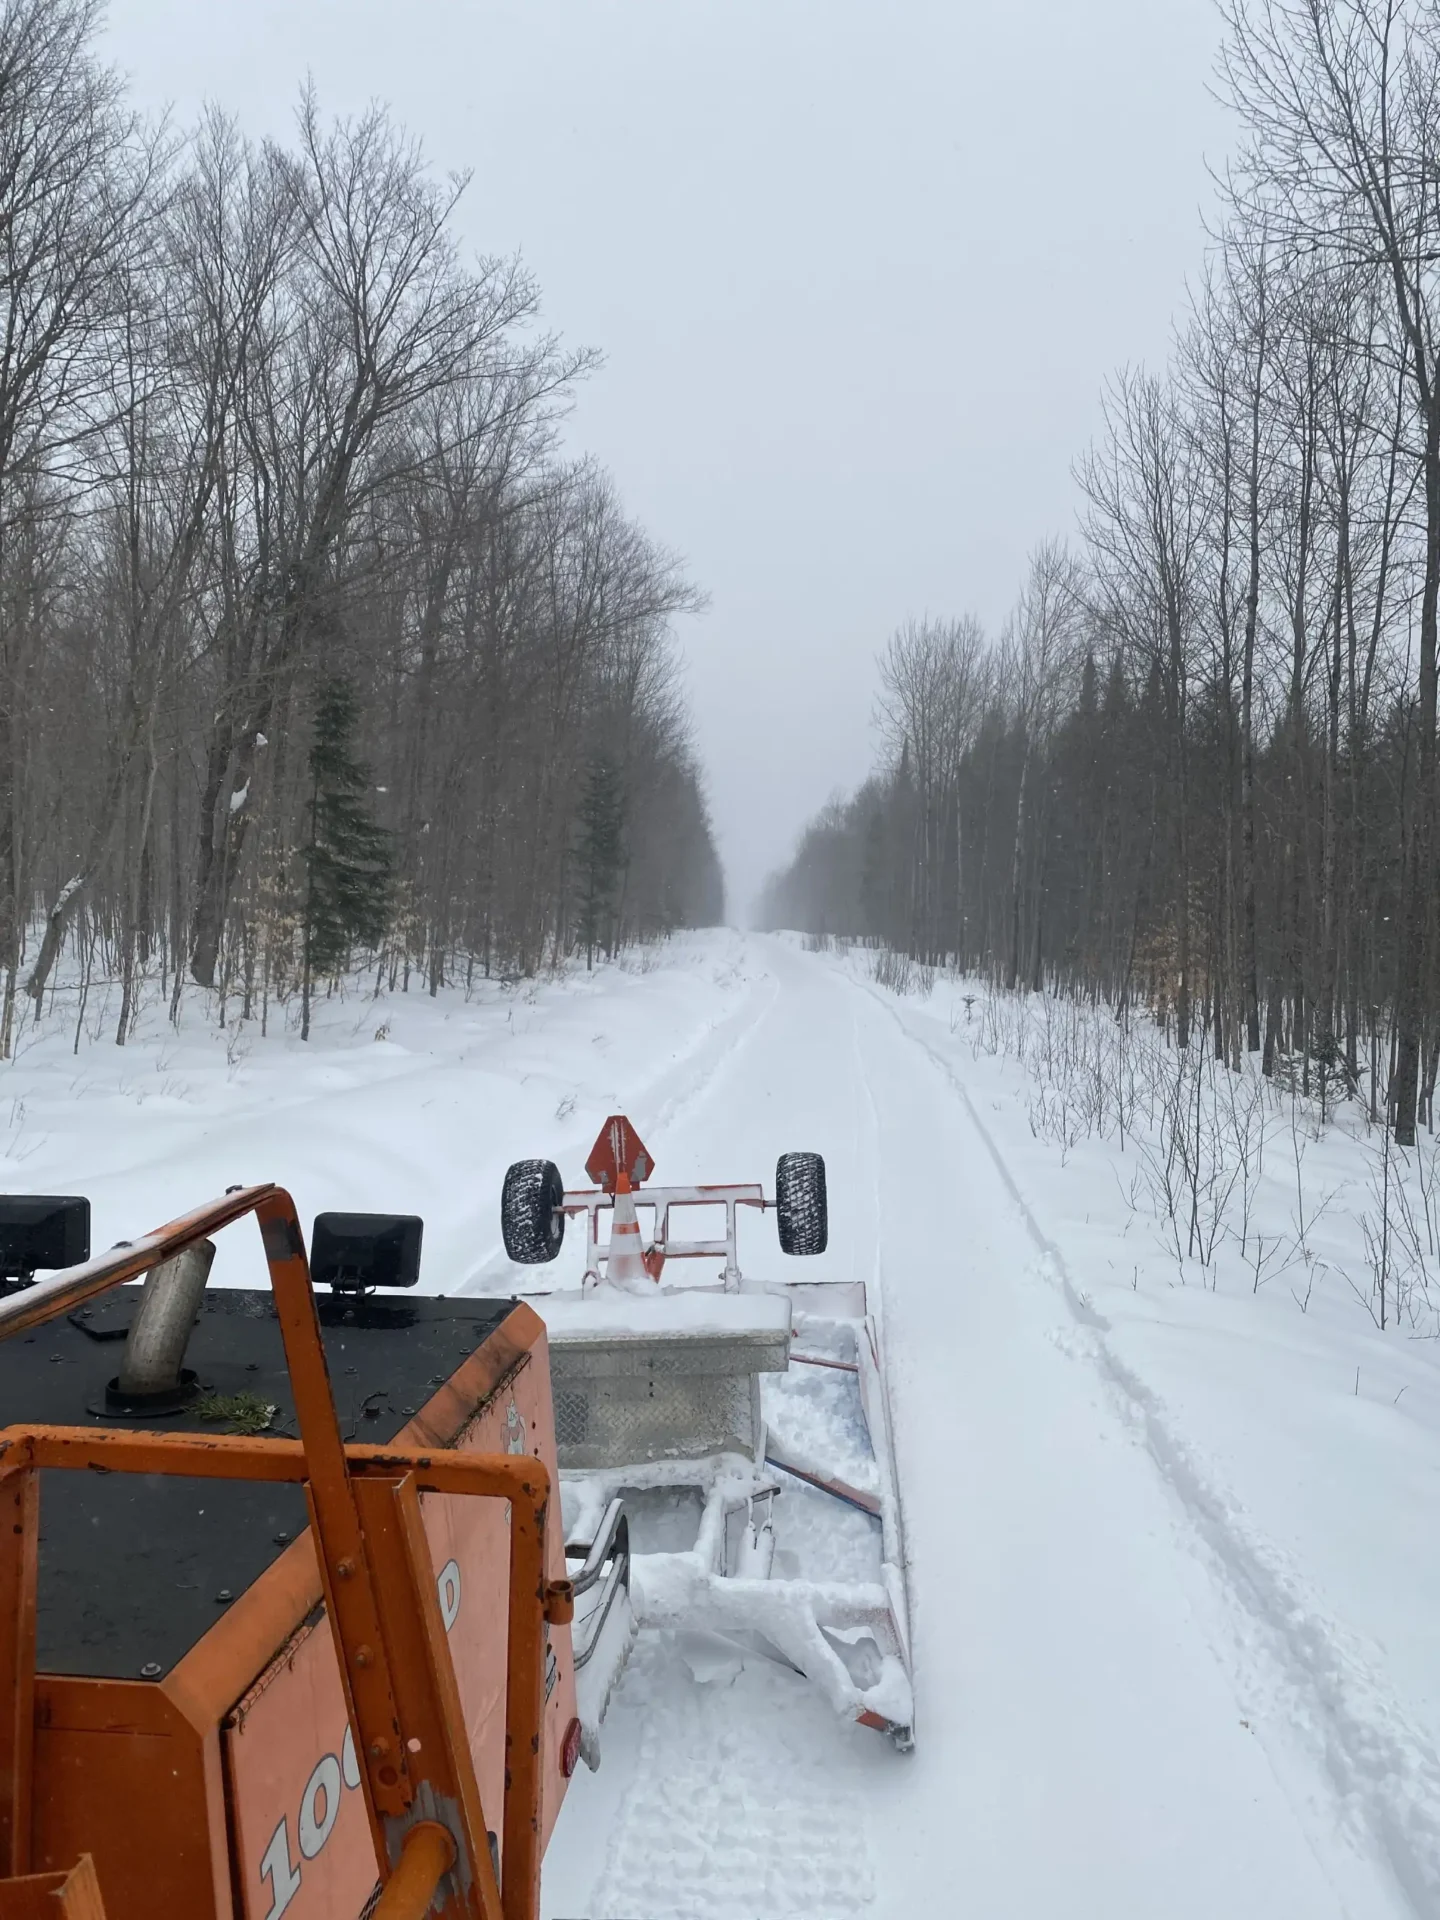 A snow plow driving down the road in winter.